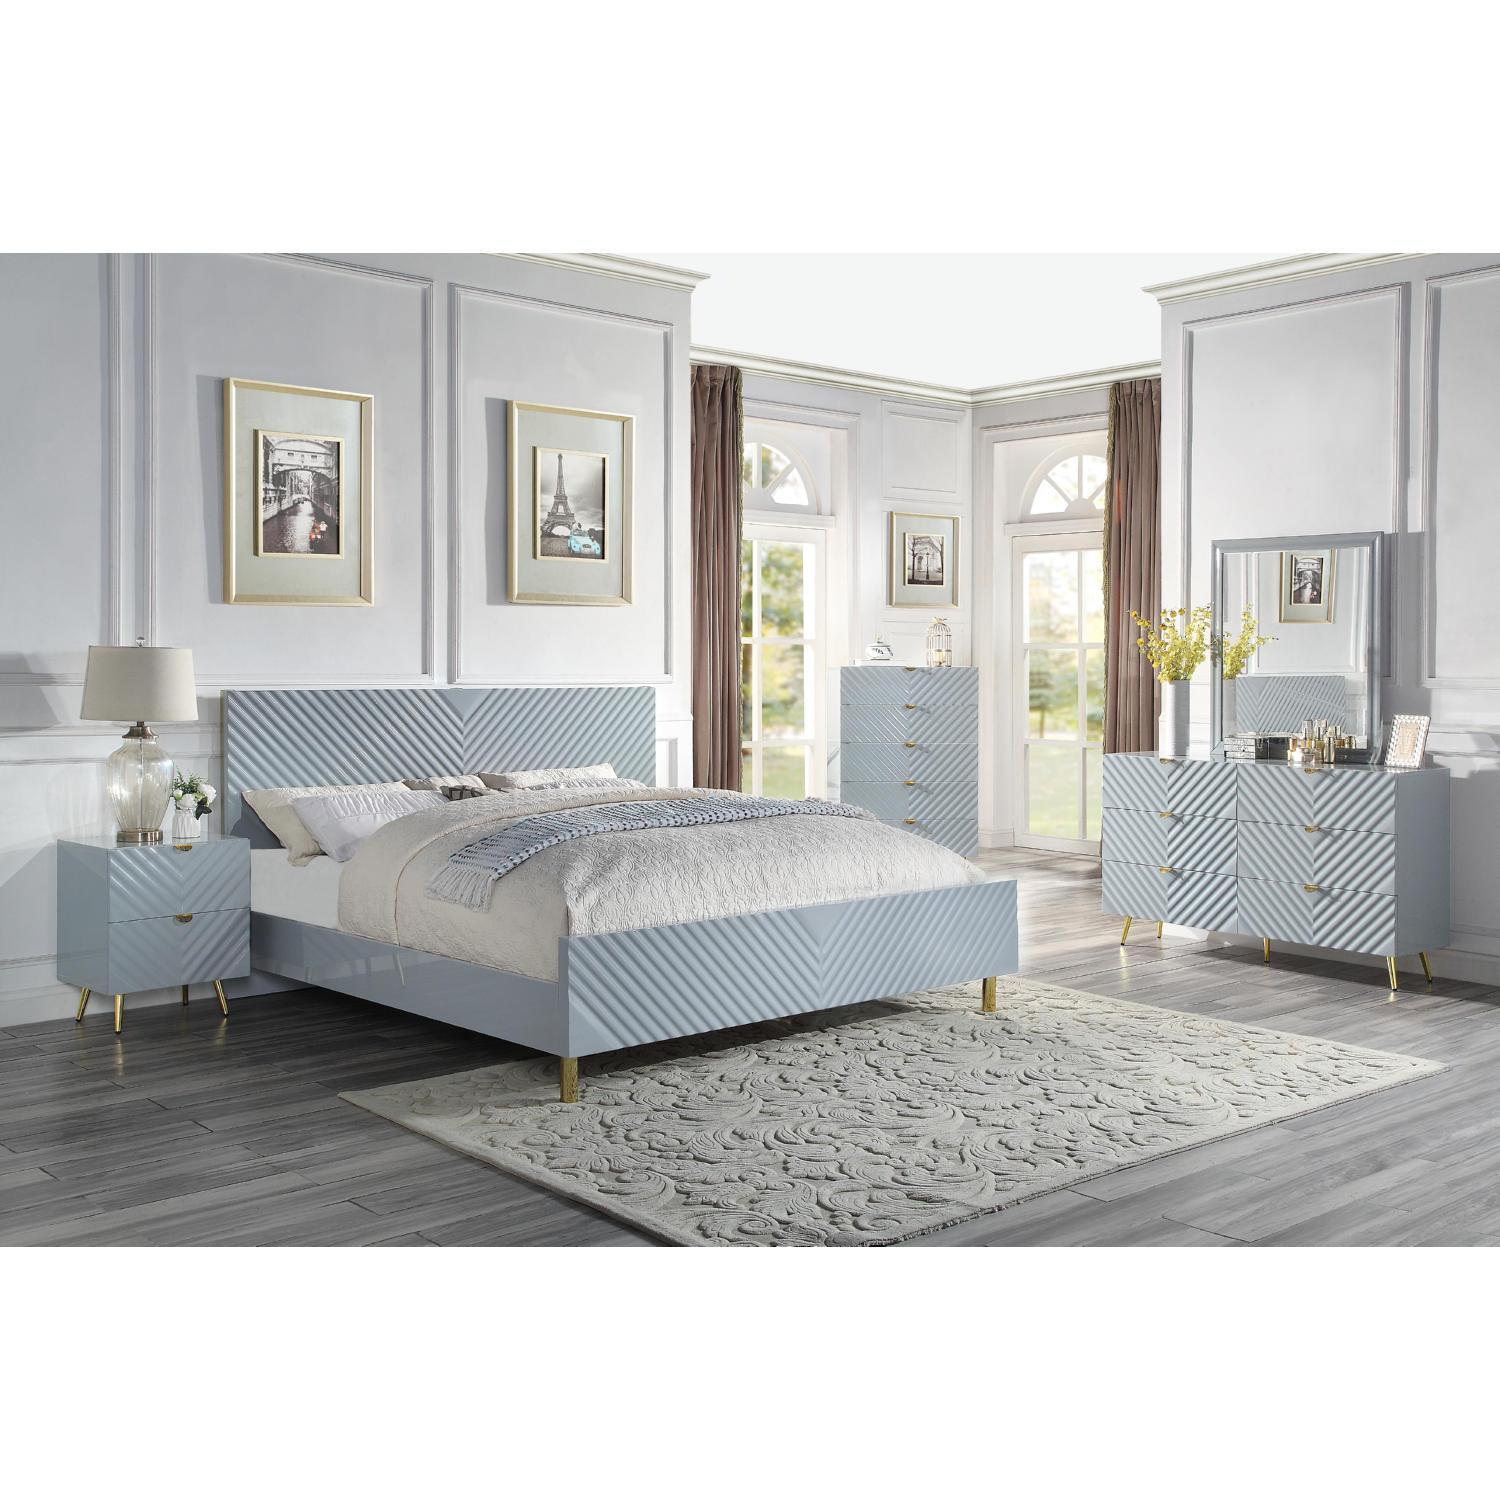 Modern, Casual Bedroom Set Gaines BD01040Q-5pcs in Gray 